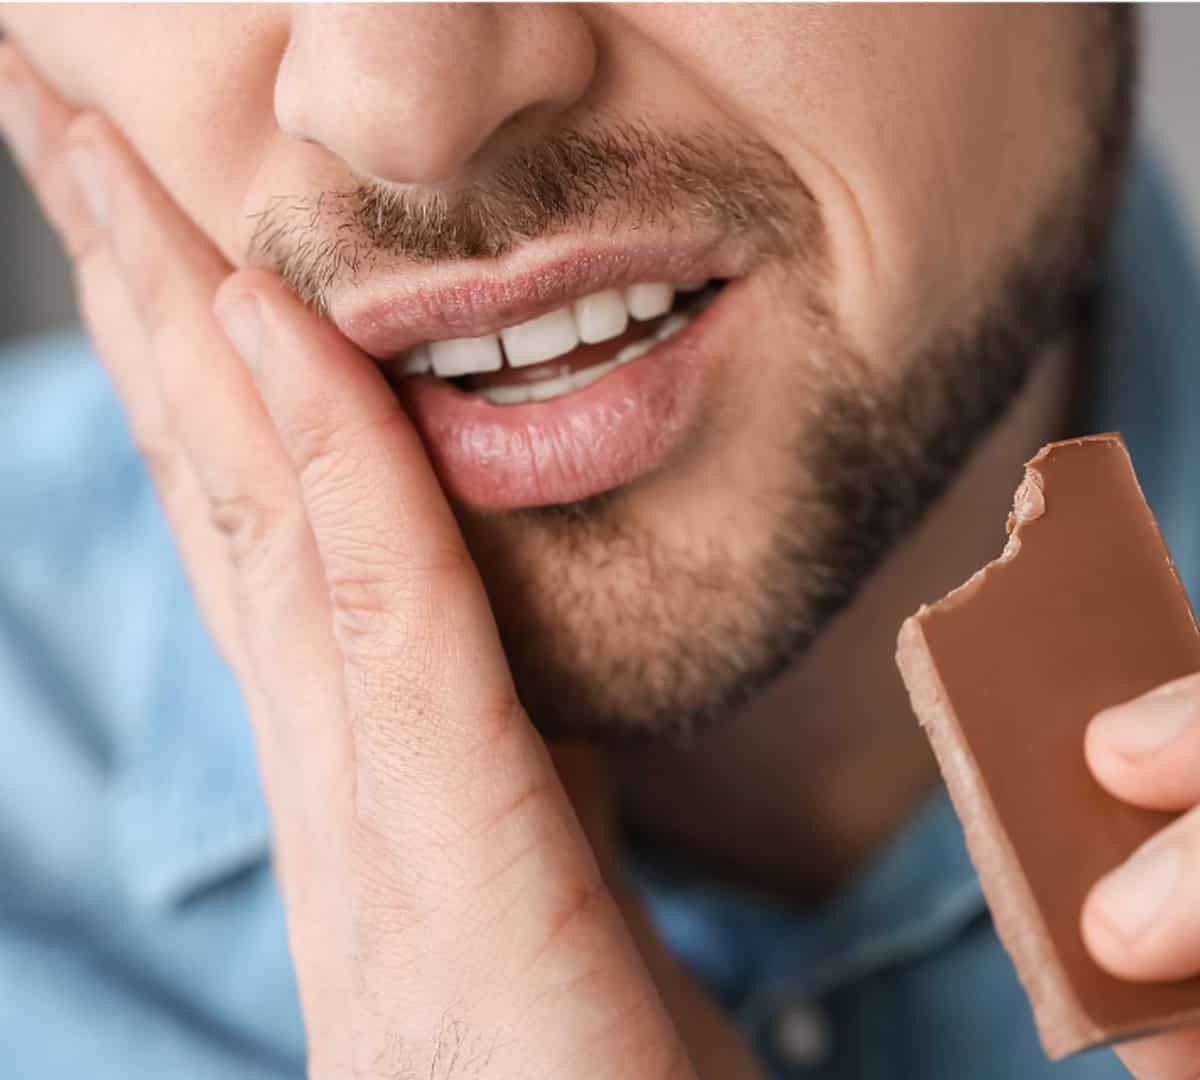 A man eating a chocolate bar with a painful grimace on his face.